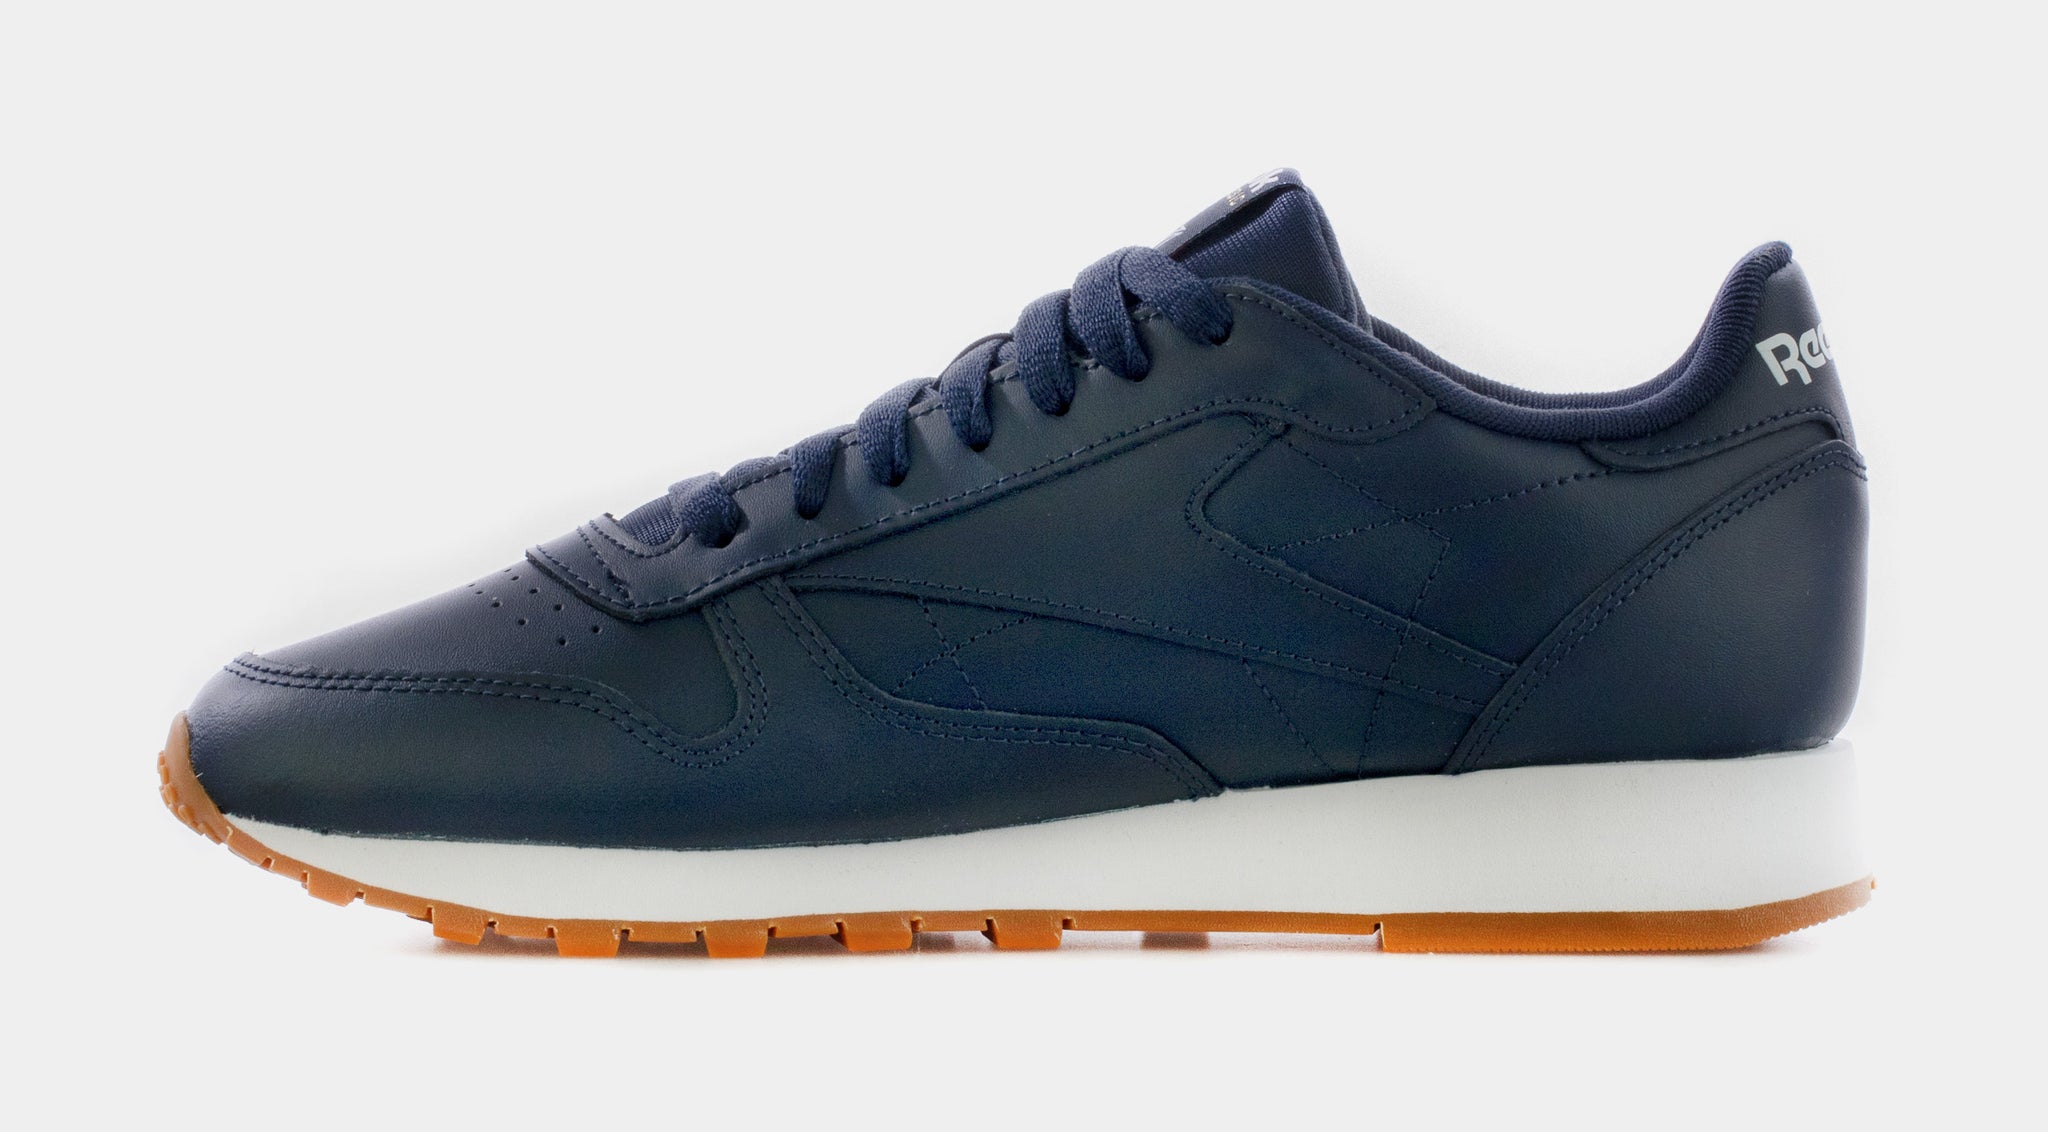 Reebok Classic Leather Mens GY3600 Shoe – Lifestyle Palace Navy Shoes Blue